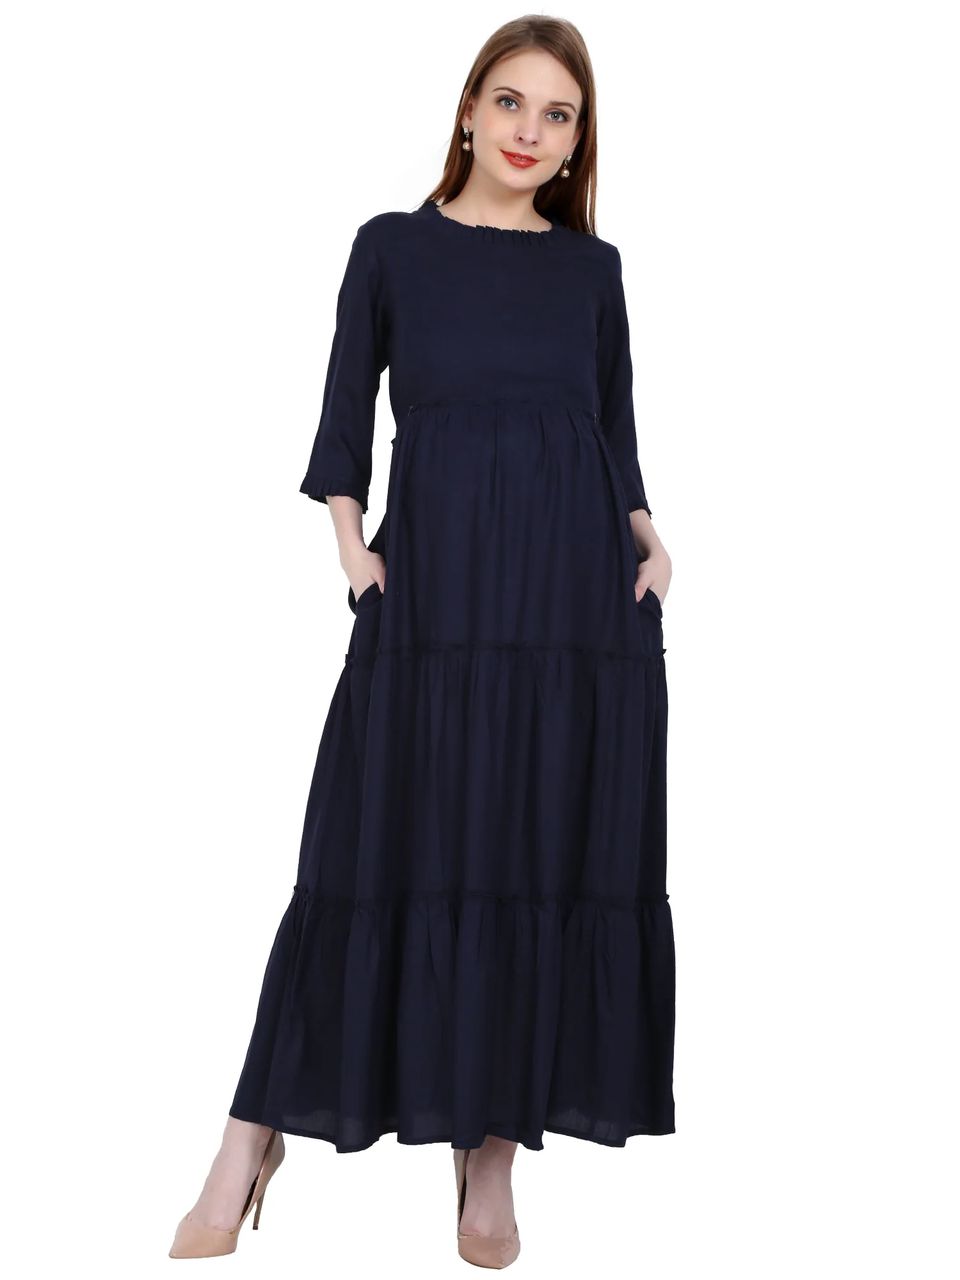 Maternity and Feeding Kurti/Dress | Rayon Navy Blue Color | With Cotton Lining